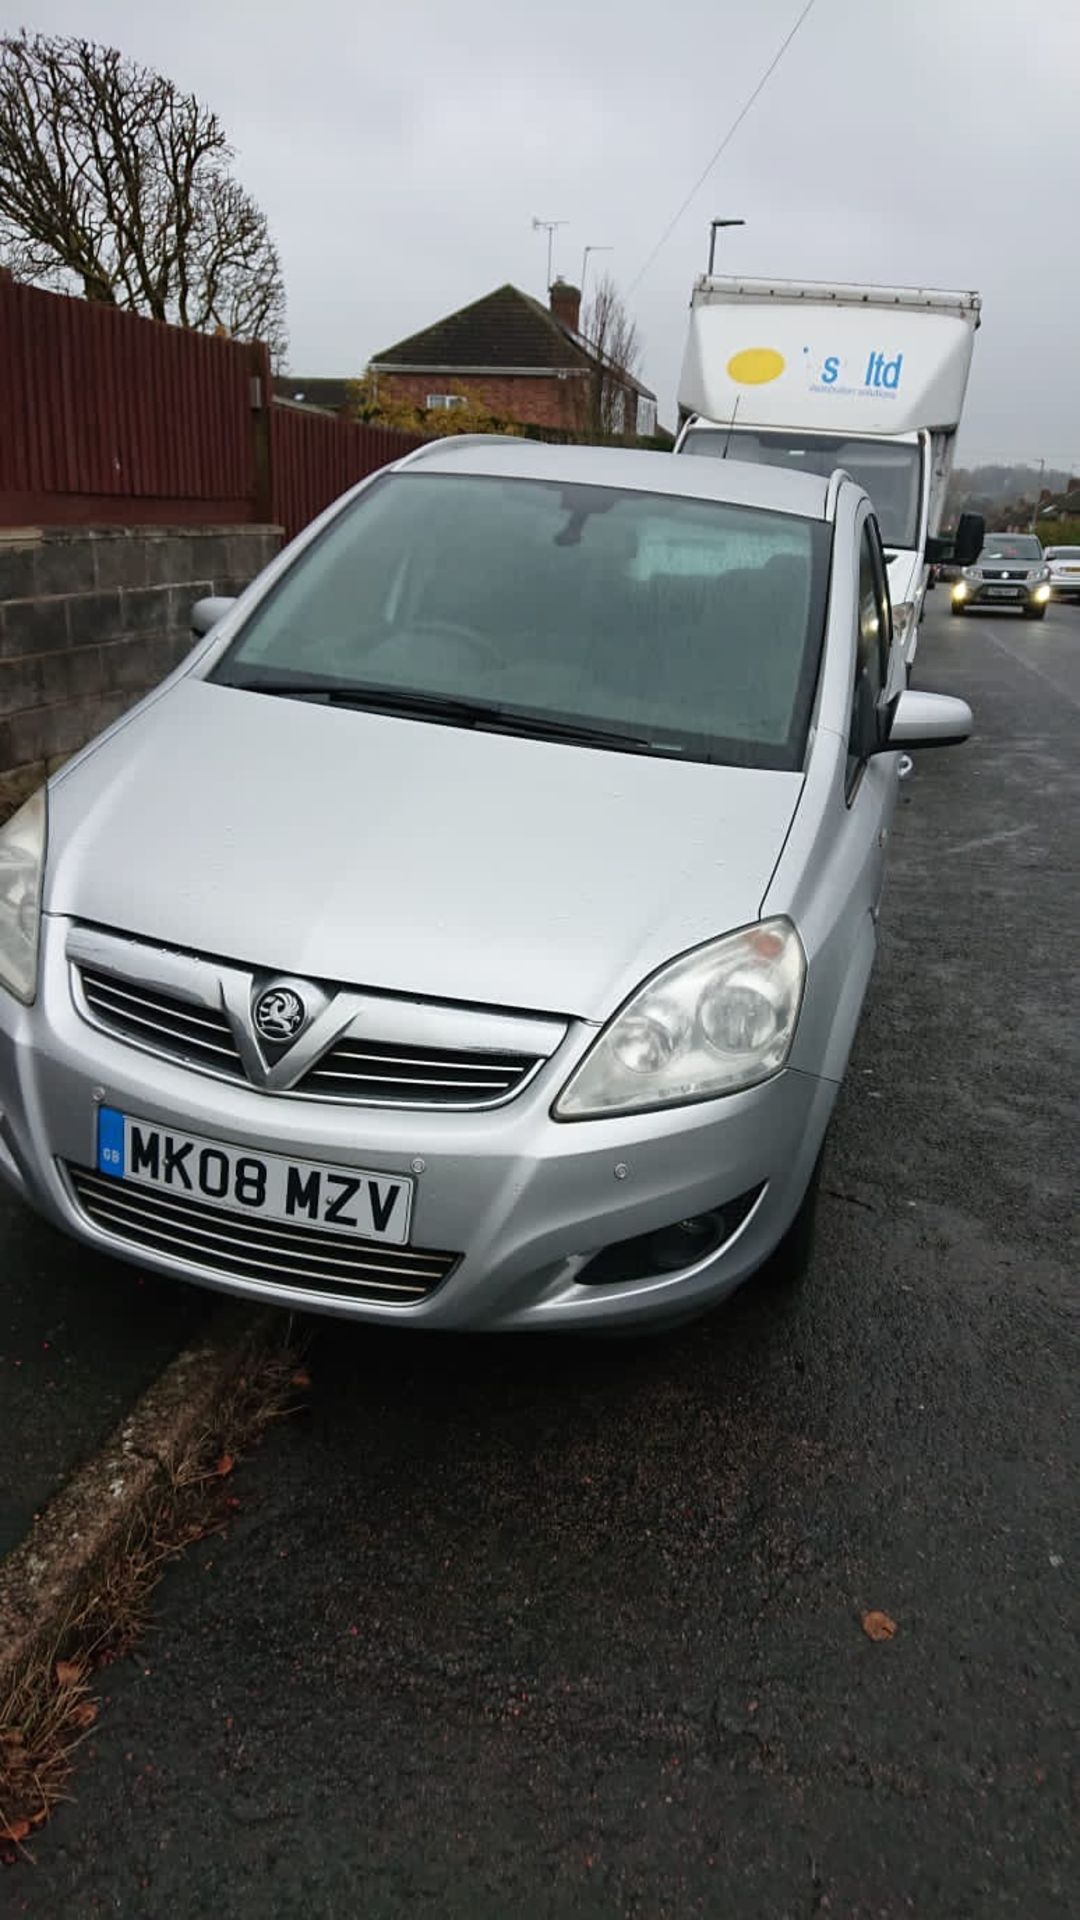 VAUXHALL ZAFIRA MKO8 MZV 1.9 CDTI COLLECTION LEICESTER - Image 2 of 10